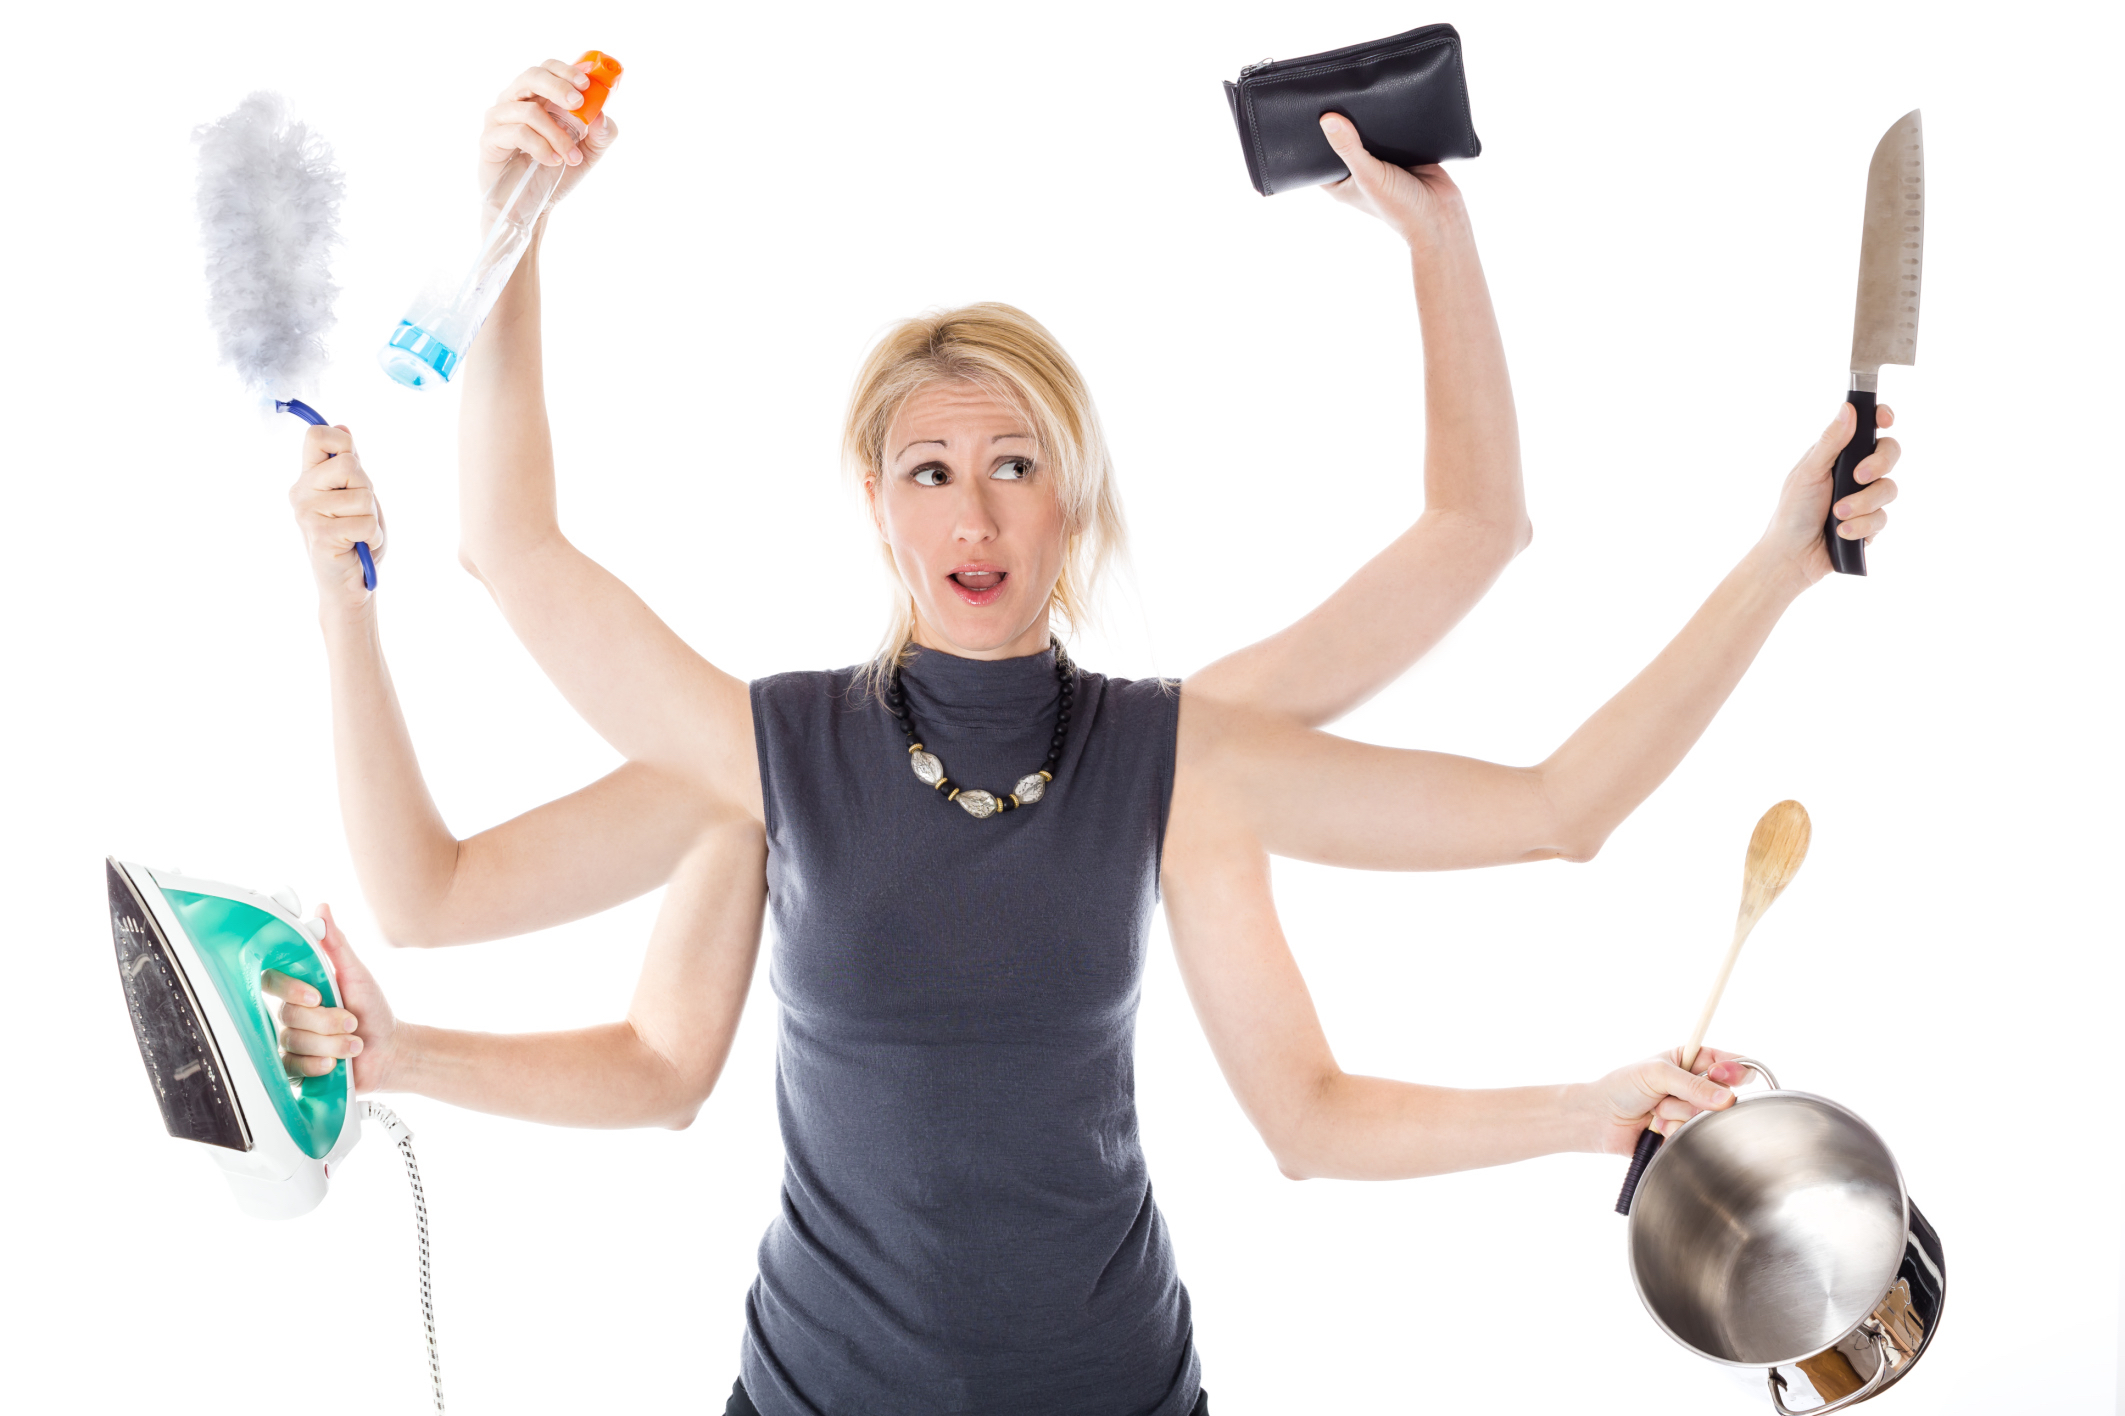 Image of a woman juggling work and family responsibilities